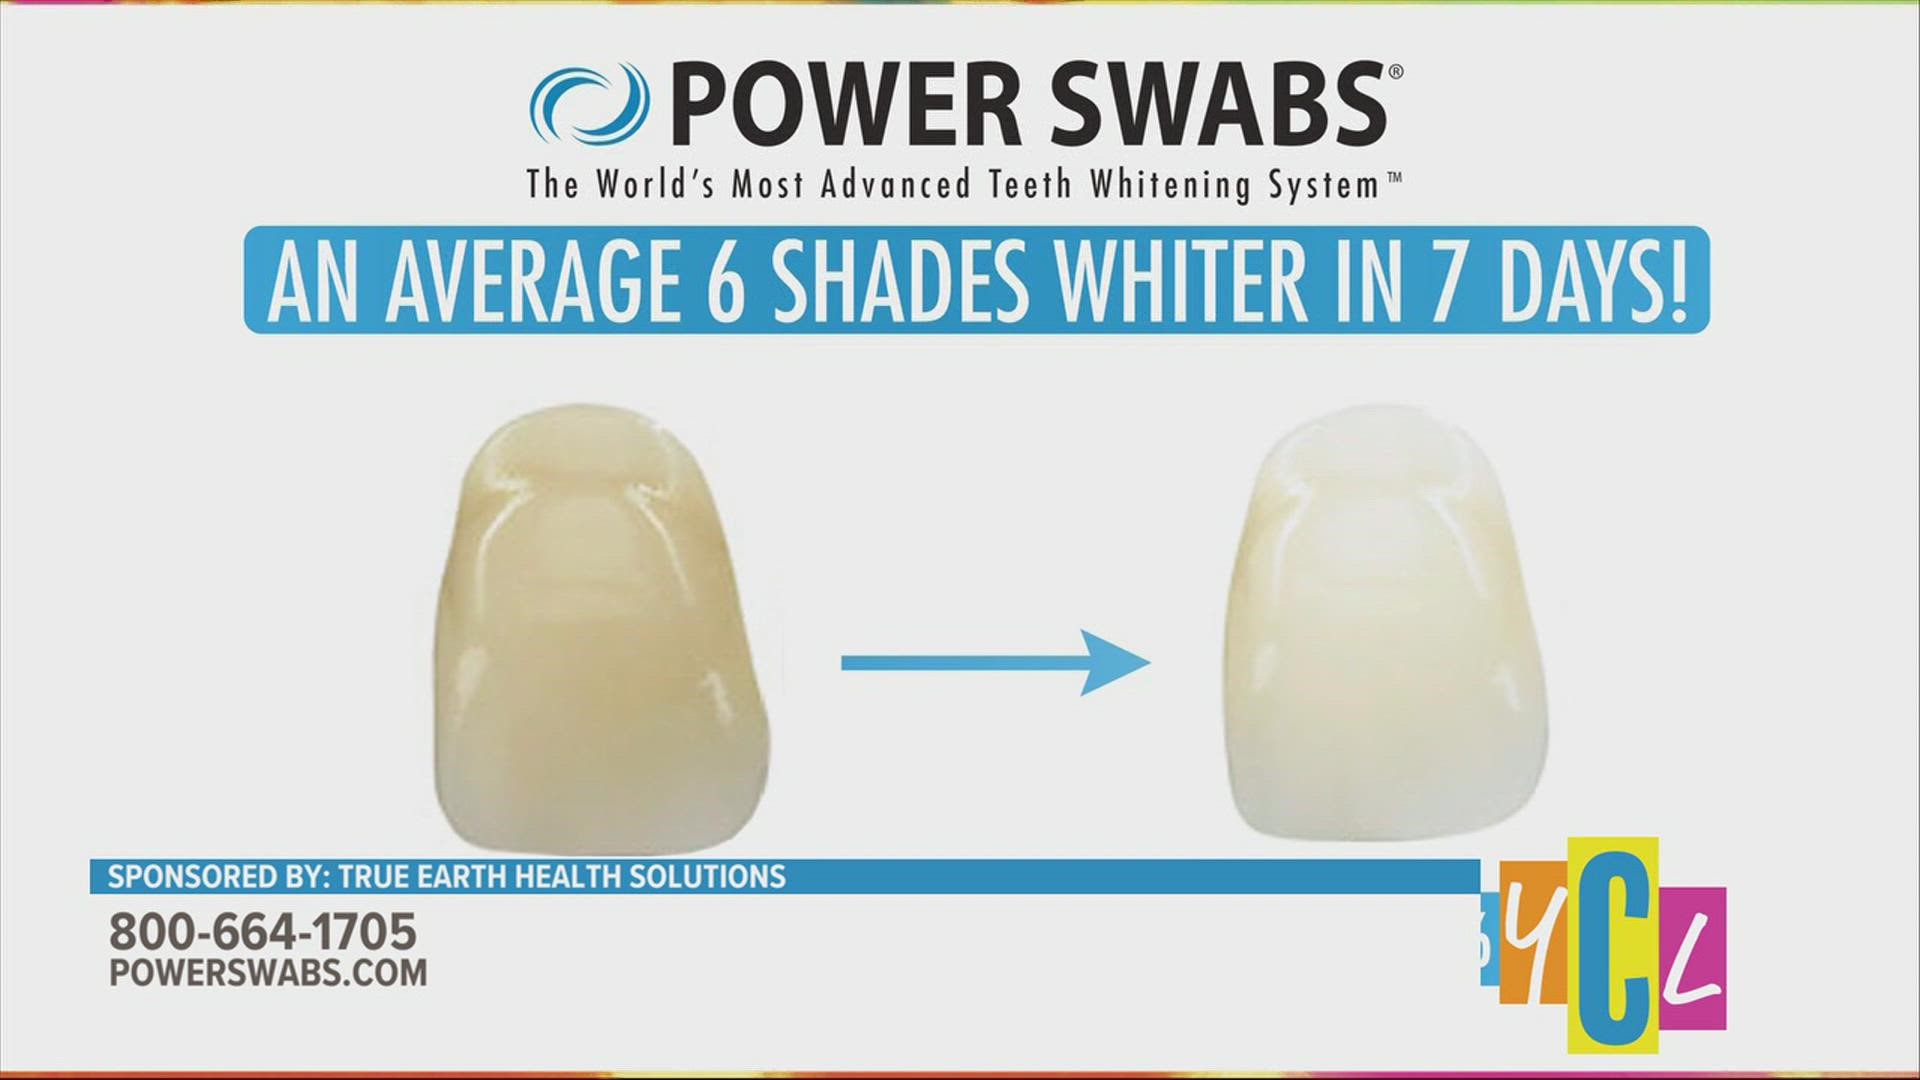 Power Swabs claims to work in five minutes to whiten teeth in an average of two shades. 
This segment paid for by True Earth Health Solutions.